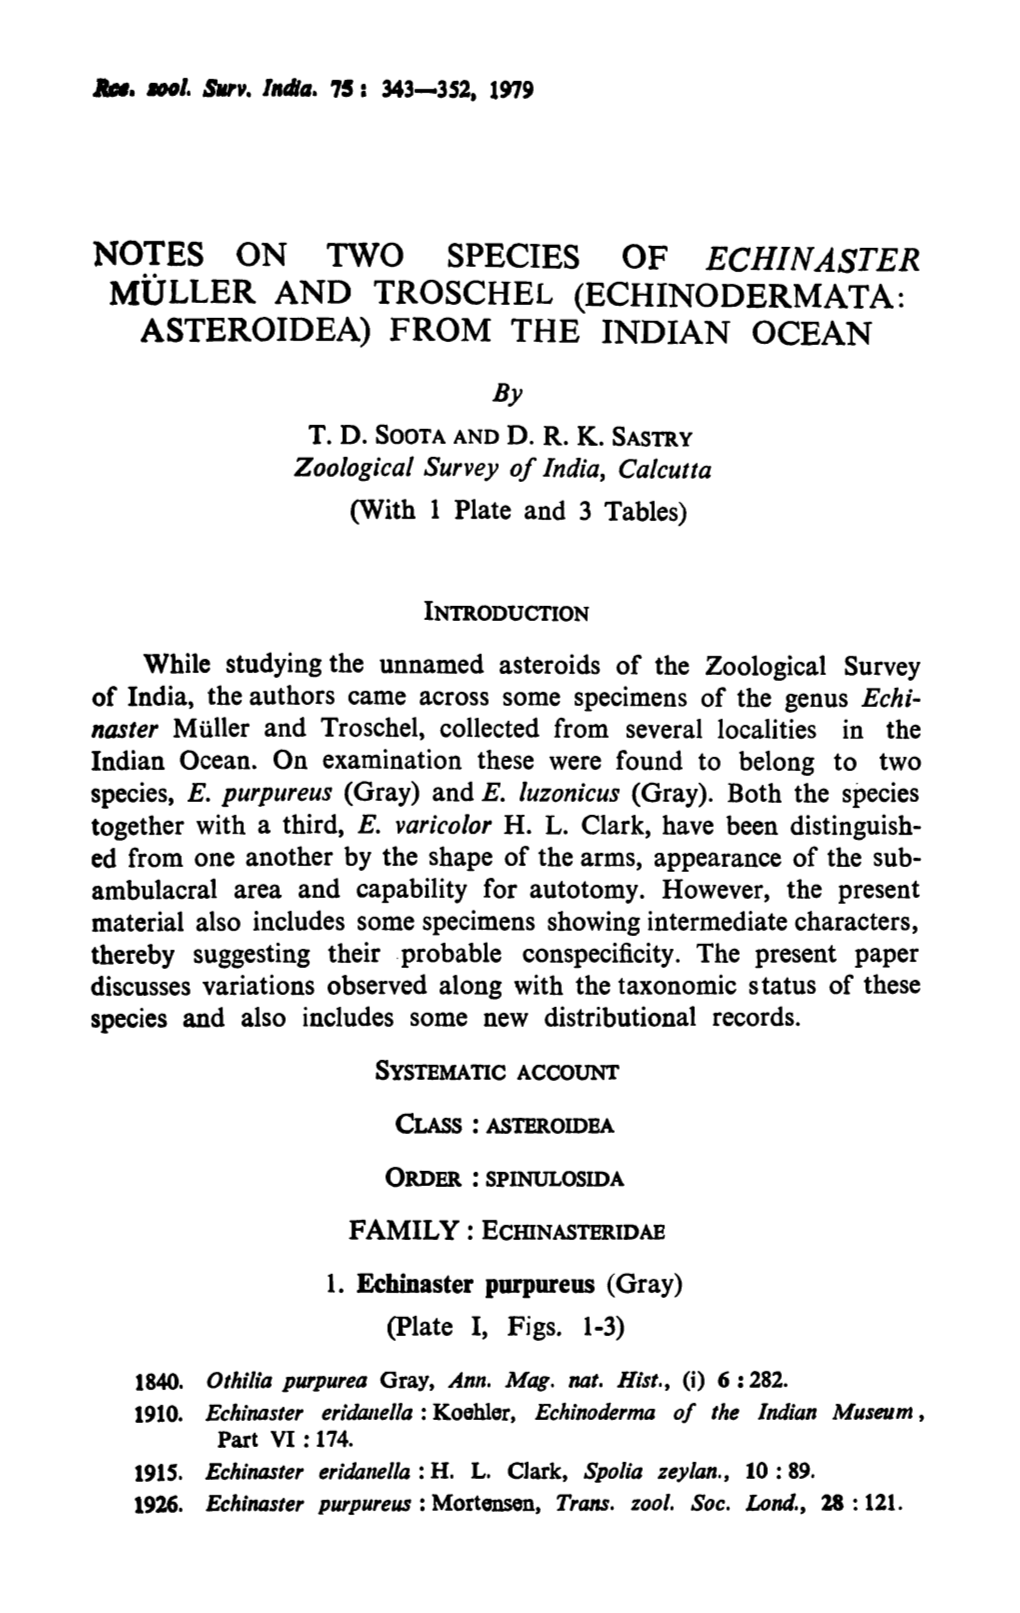 Notes on Two Species of Echinaster Muller and Troschel (Echinodermata: Asteroidea) from the Indian Ocean